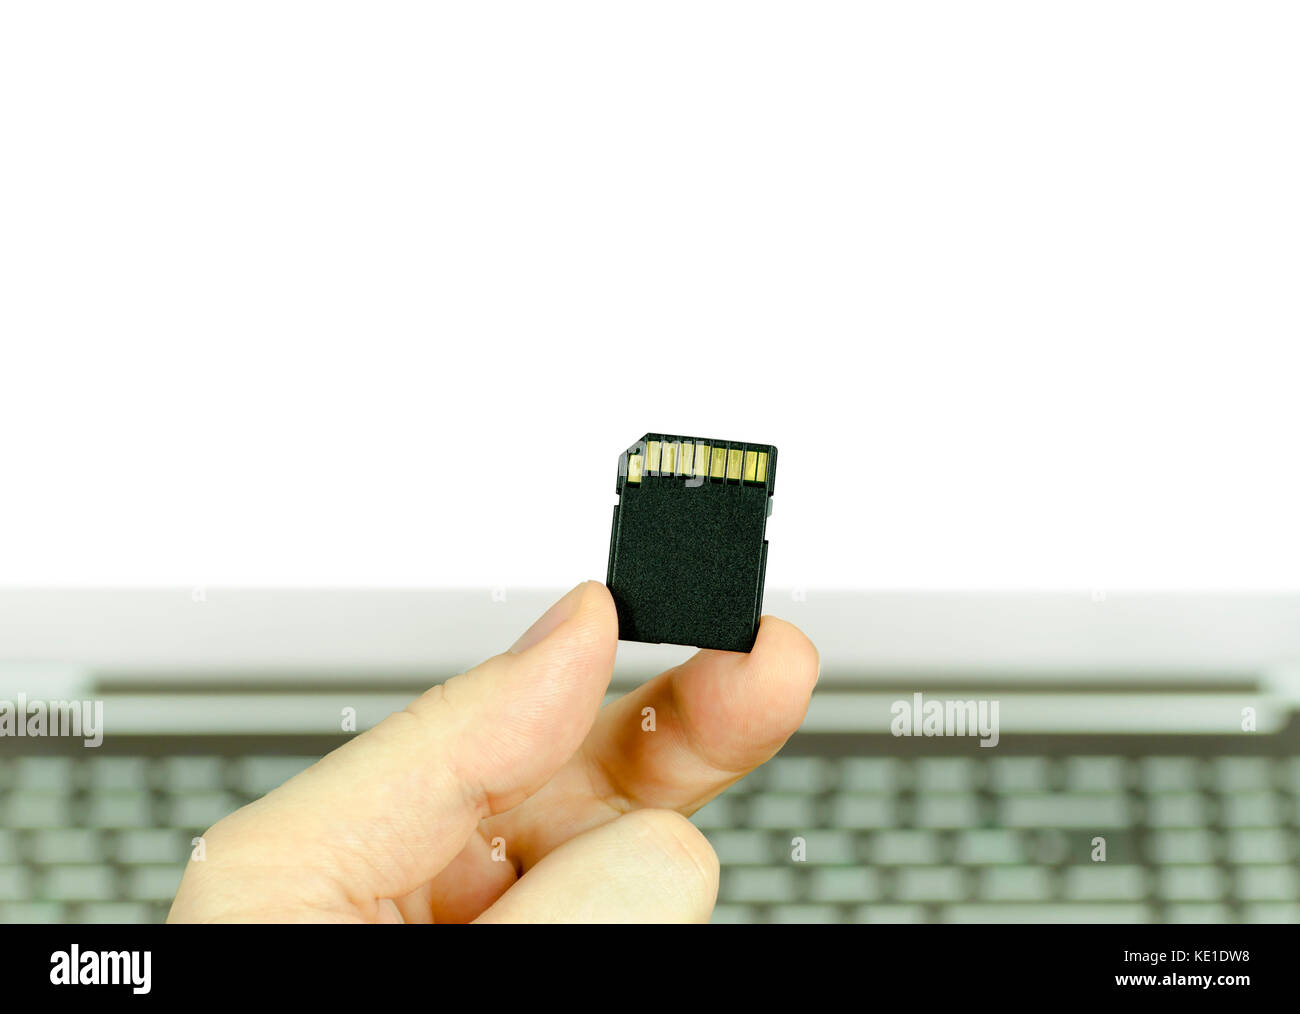 Close-up view of a hand holding a black SD memory card with a laptop, isolated in white background Stock Photo